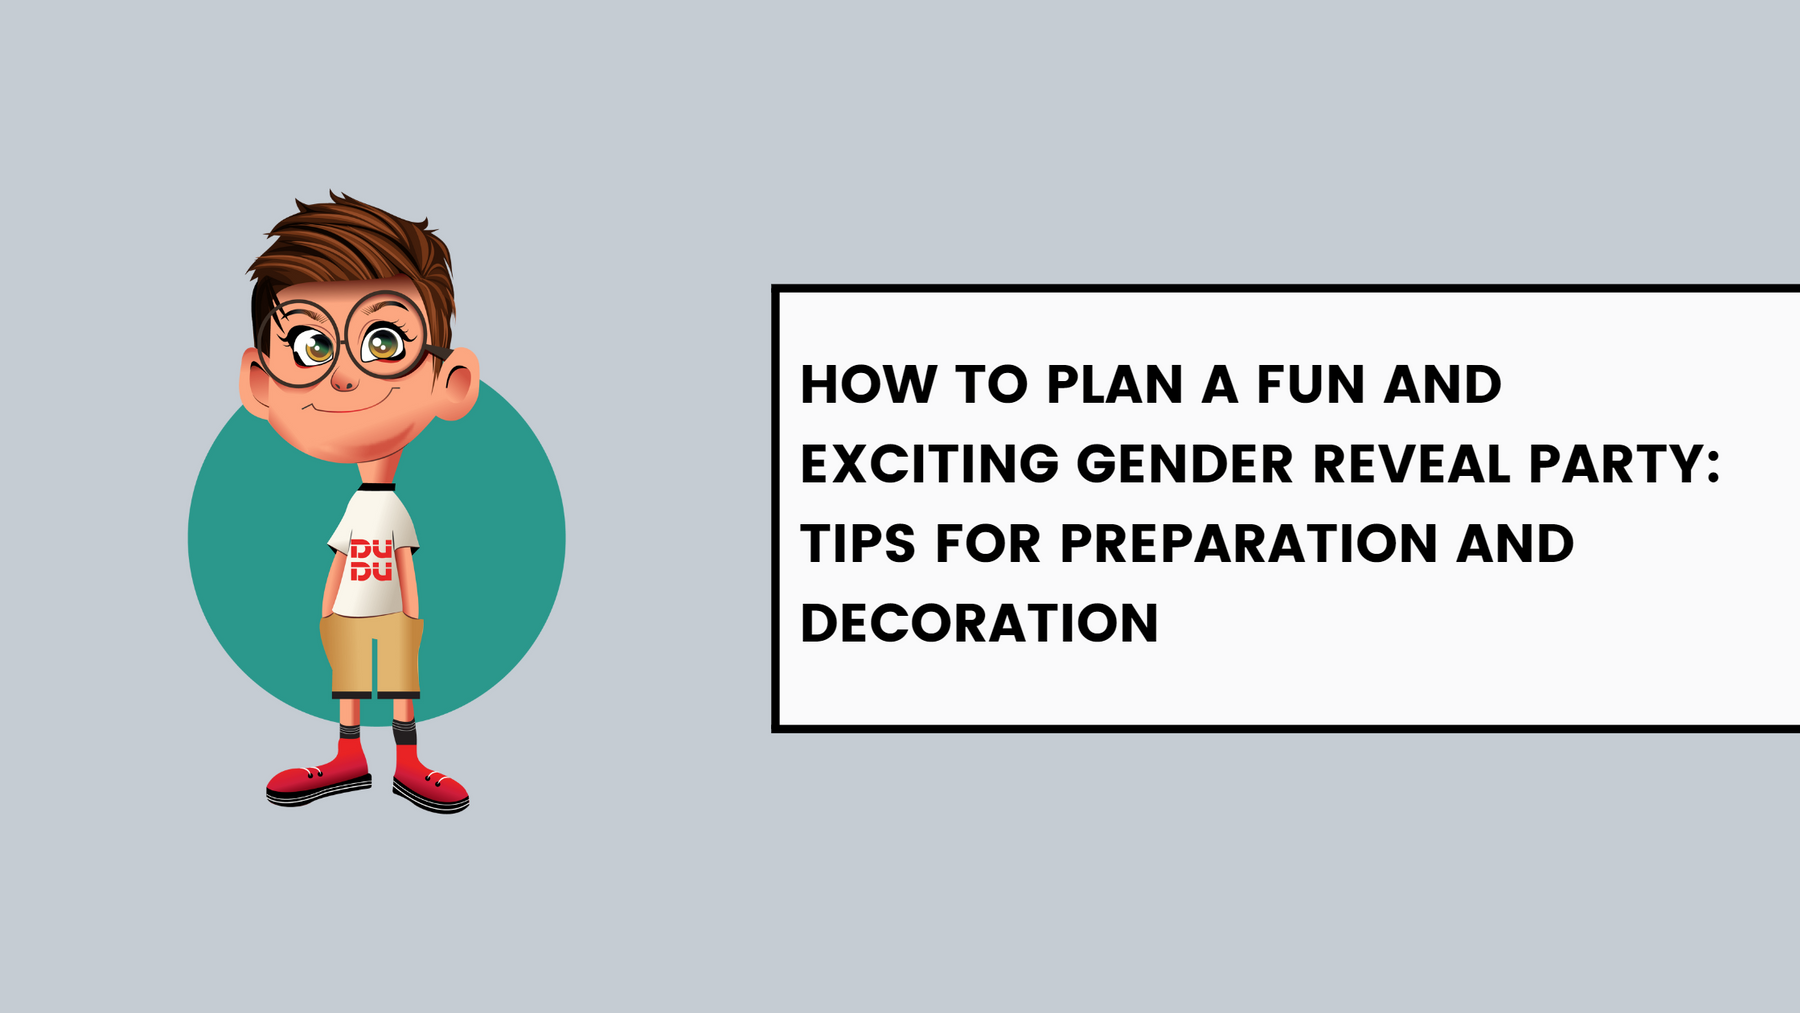 How to Plan a Fun and Exciting Gender Reveal Party: Tips for Preparation and Decoration